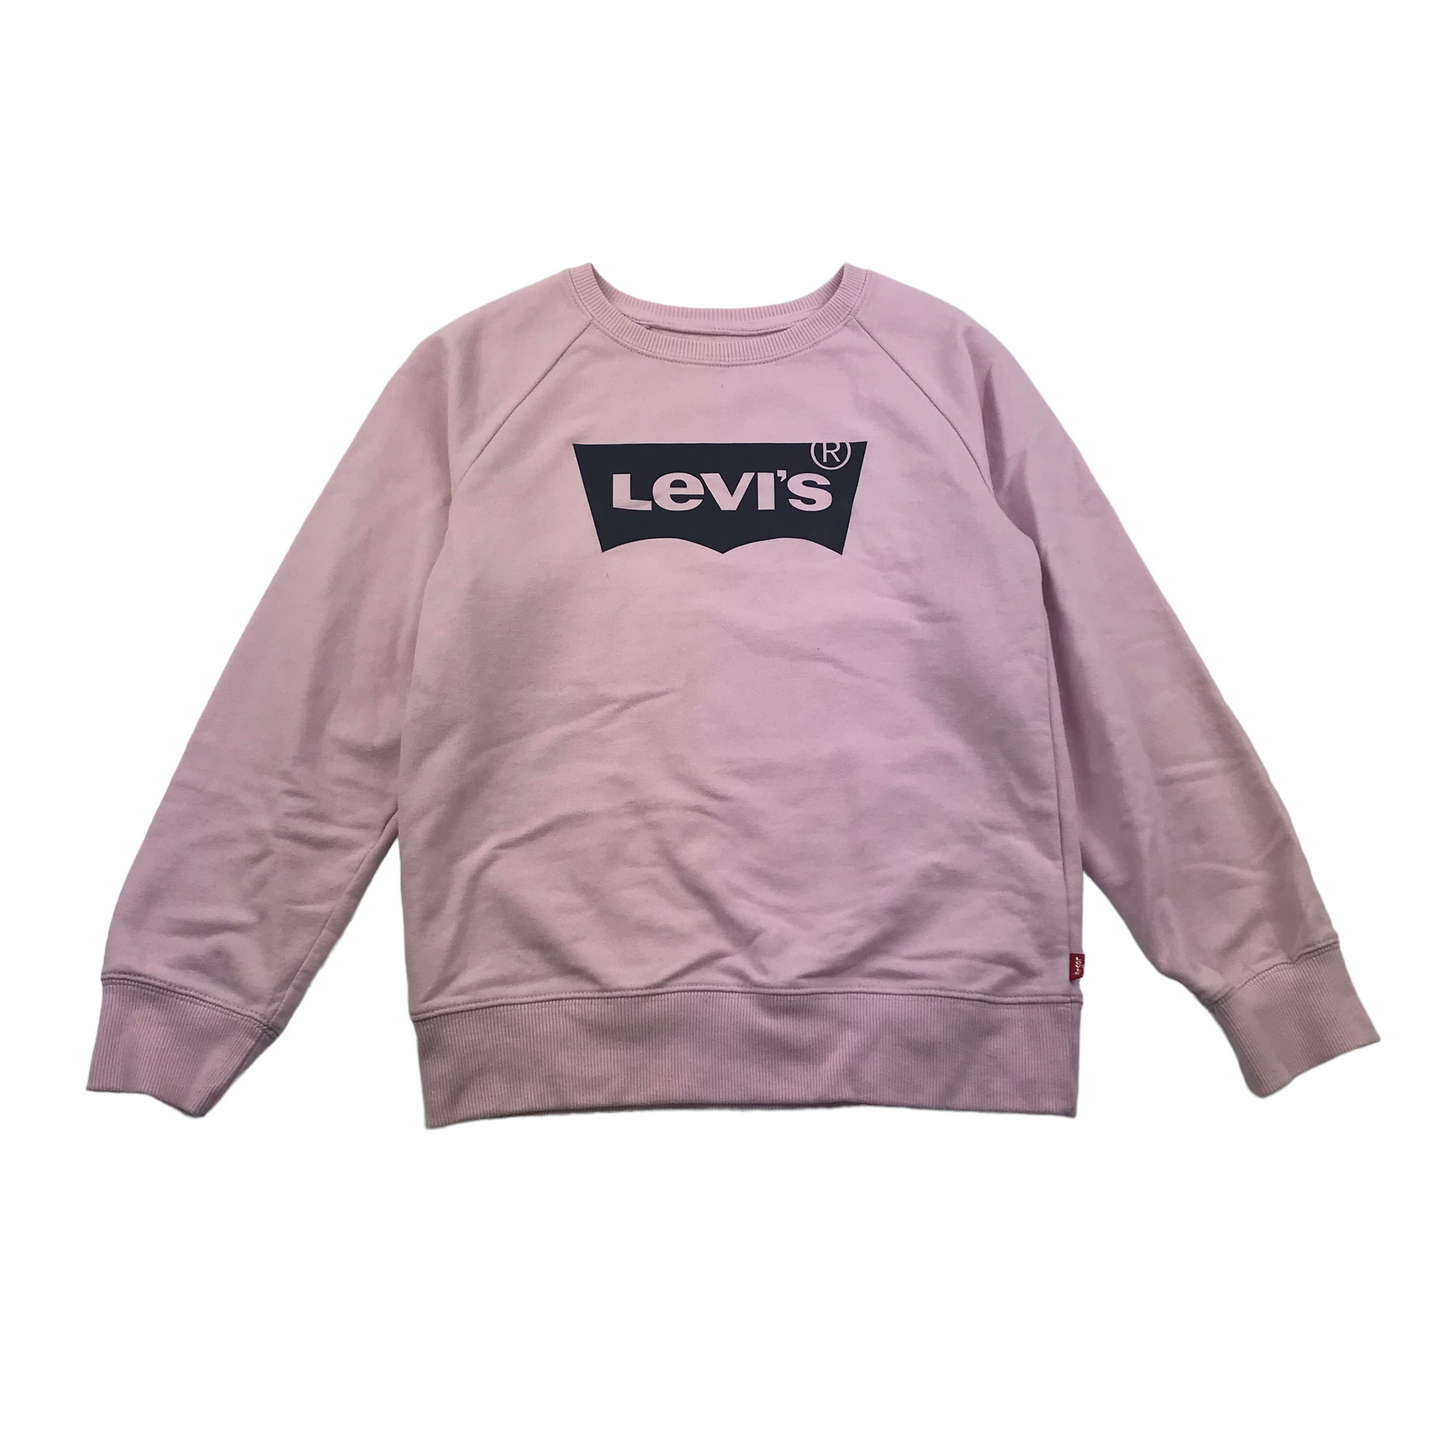 Levi's Pink Sweater Jumper Age 10